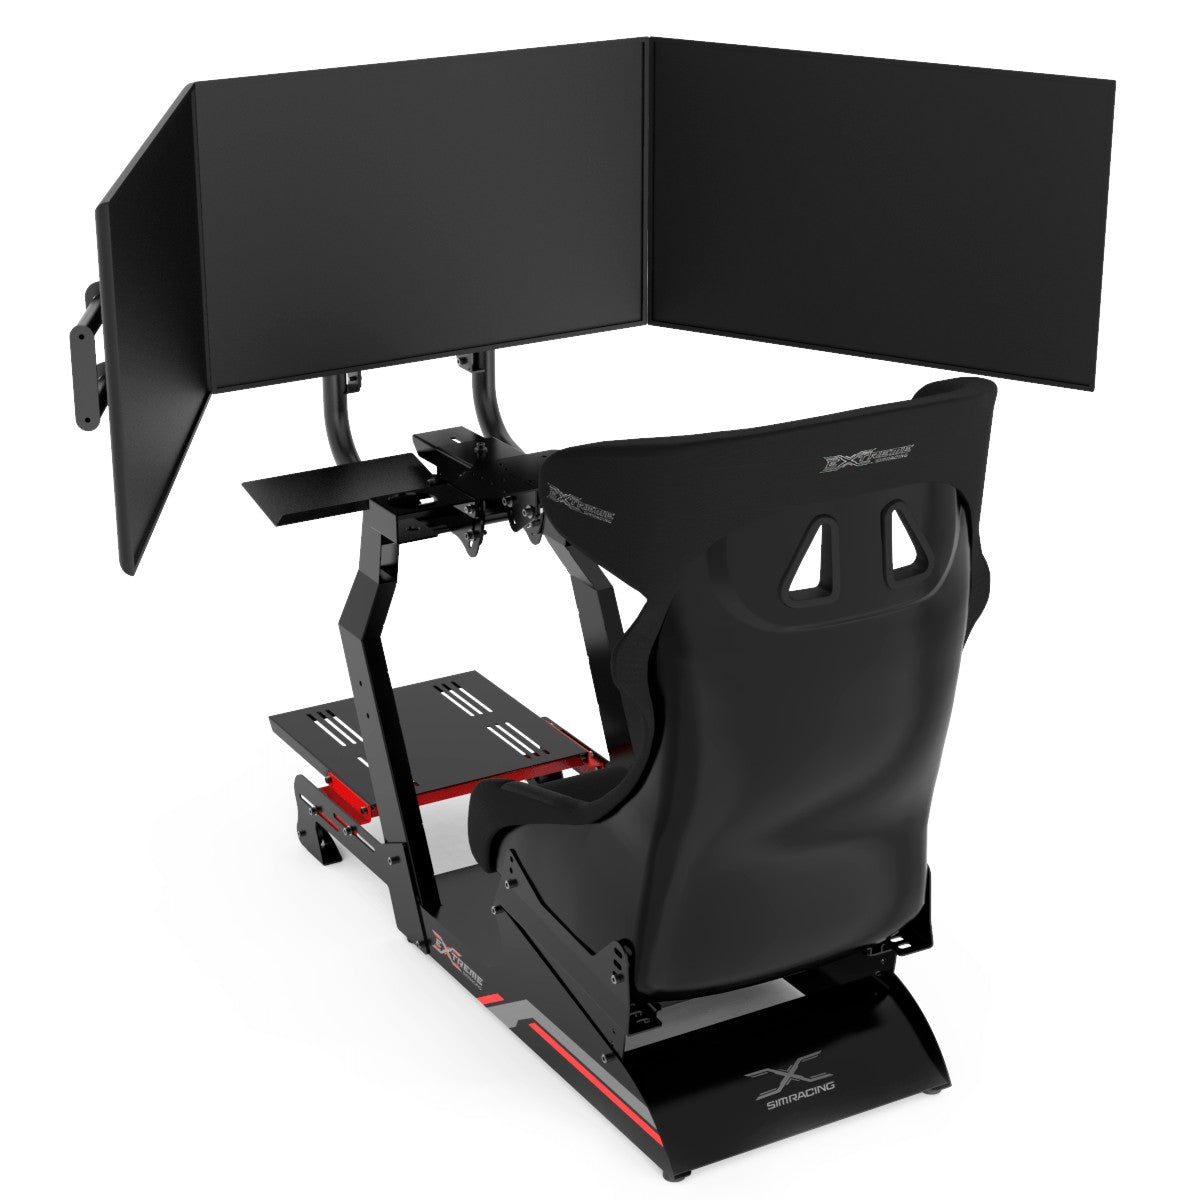 ADD ON TRIPLE SCREEN for P1 3.0 - Extreme Simracing